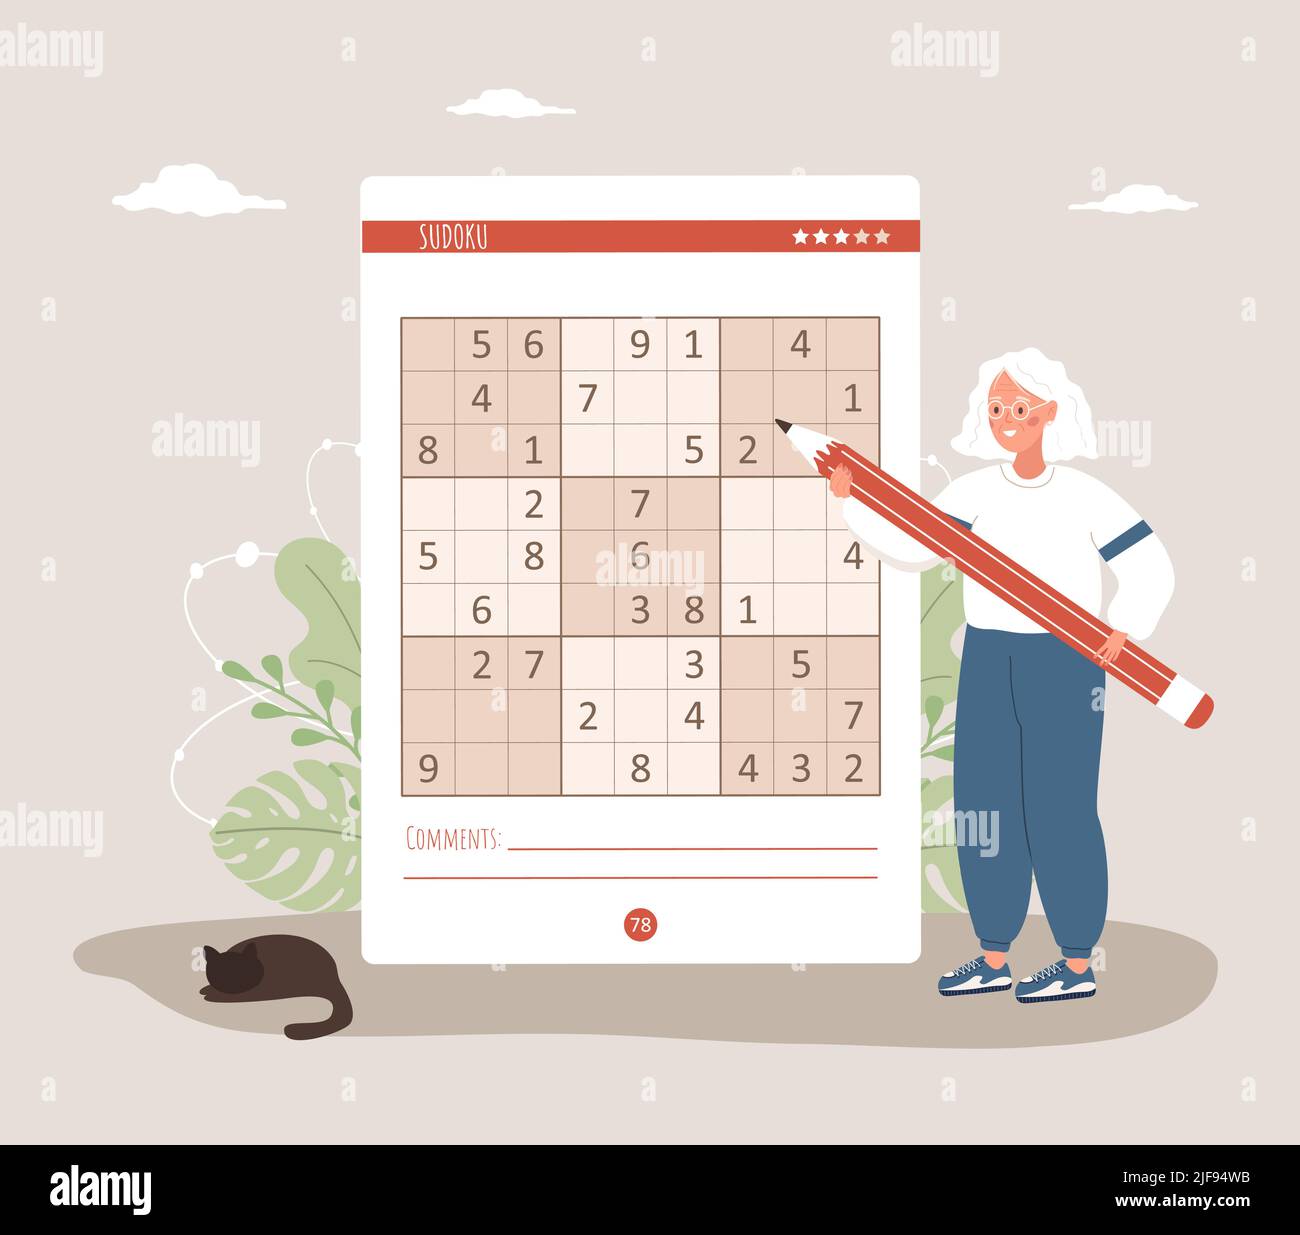 Sudoku game. Elderly woman with giant pencil solves crossword puzzle. Learning and leisure concept. Task for development of logical thinking and Stock Vector